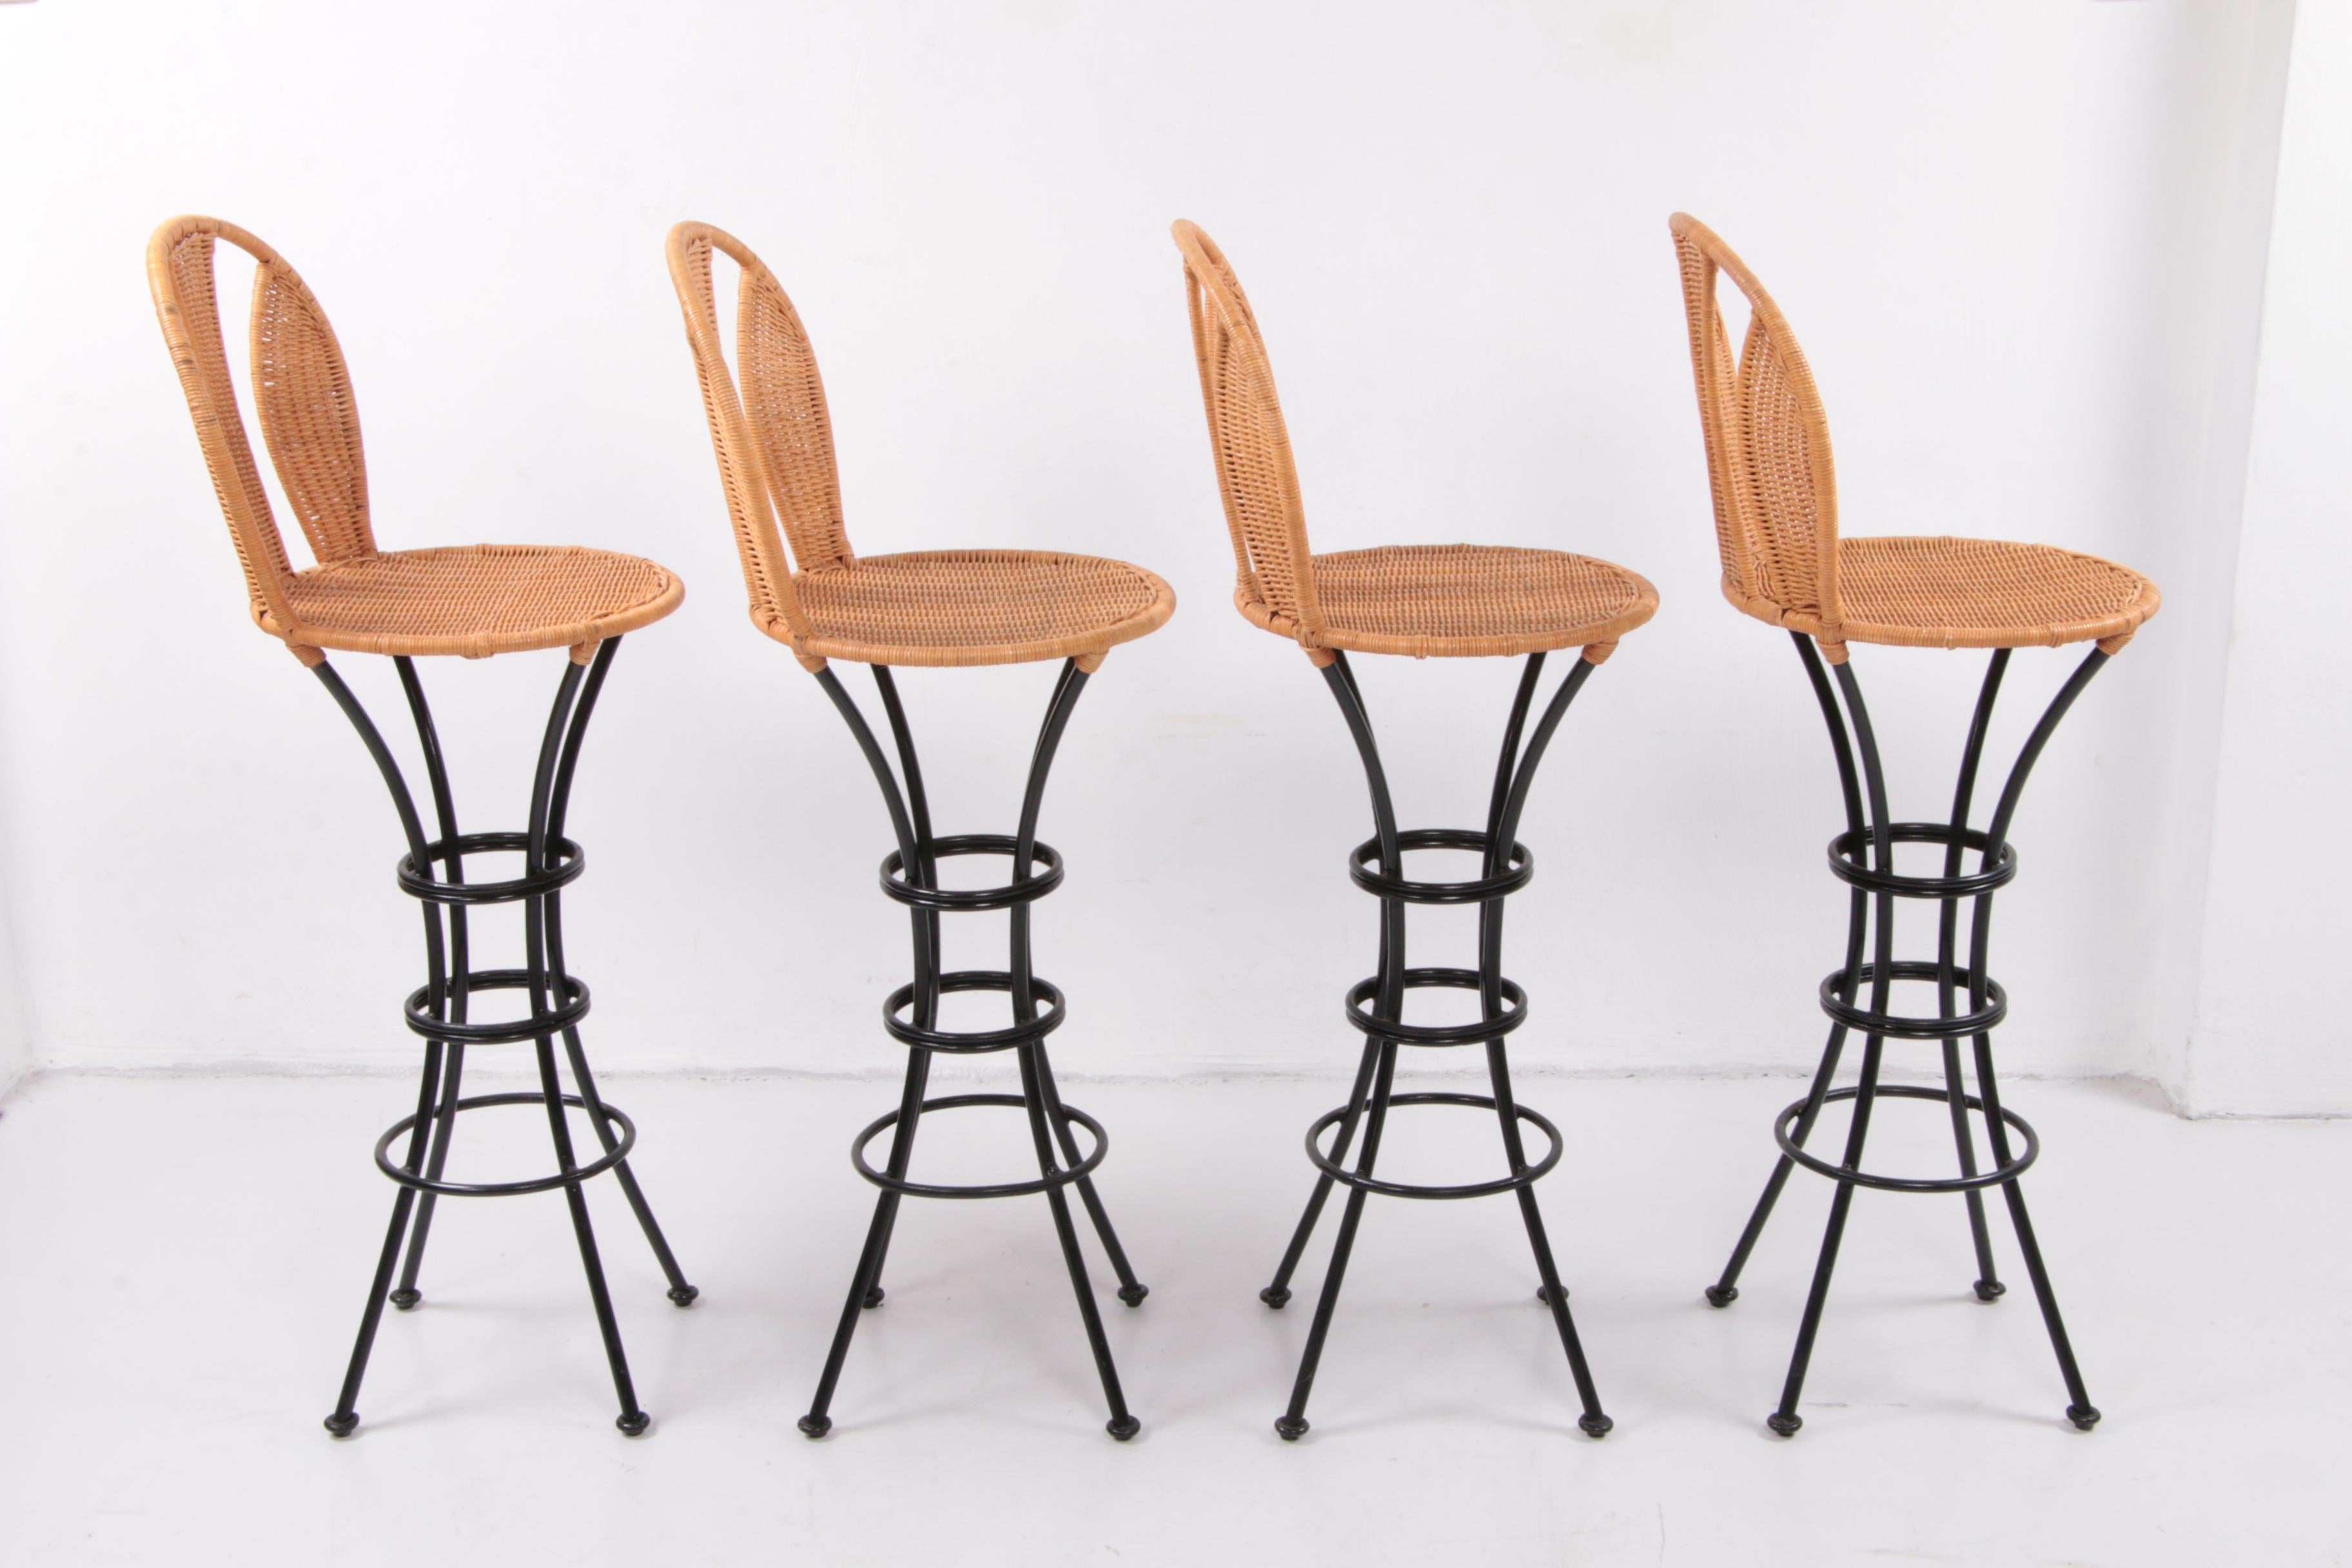 Metal Set of 4 Italian bar stools from the 1970s.